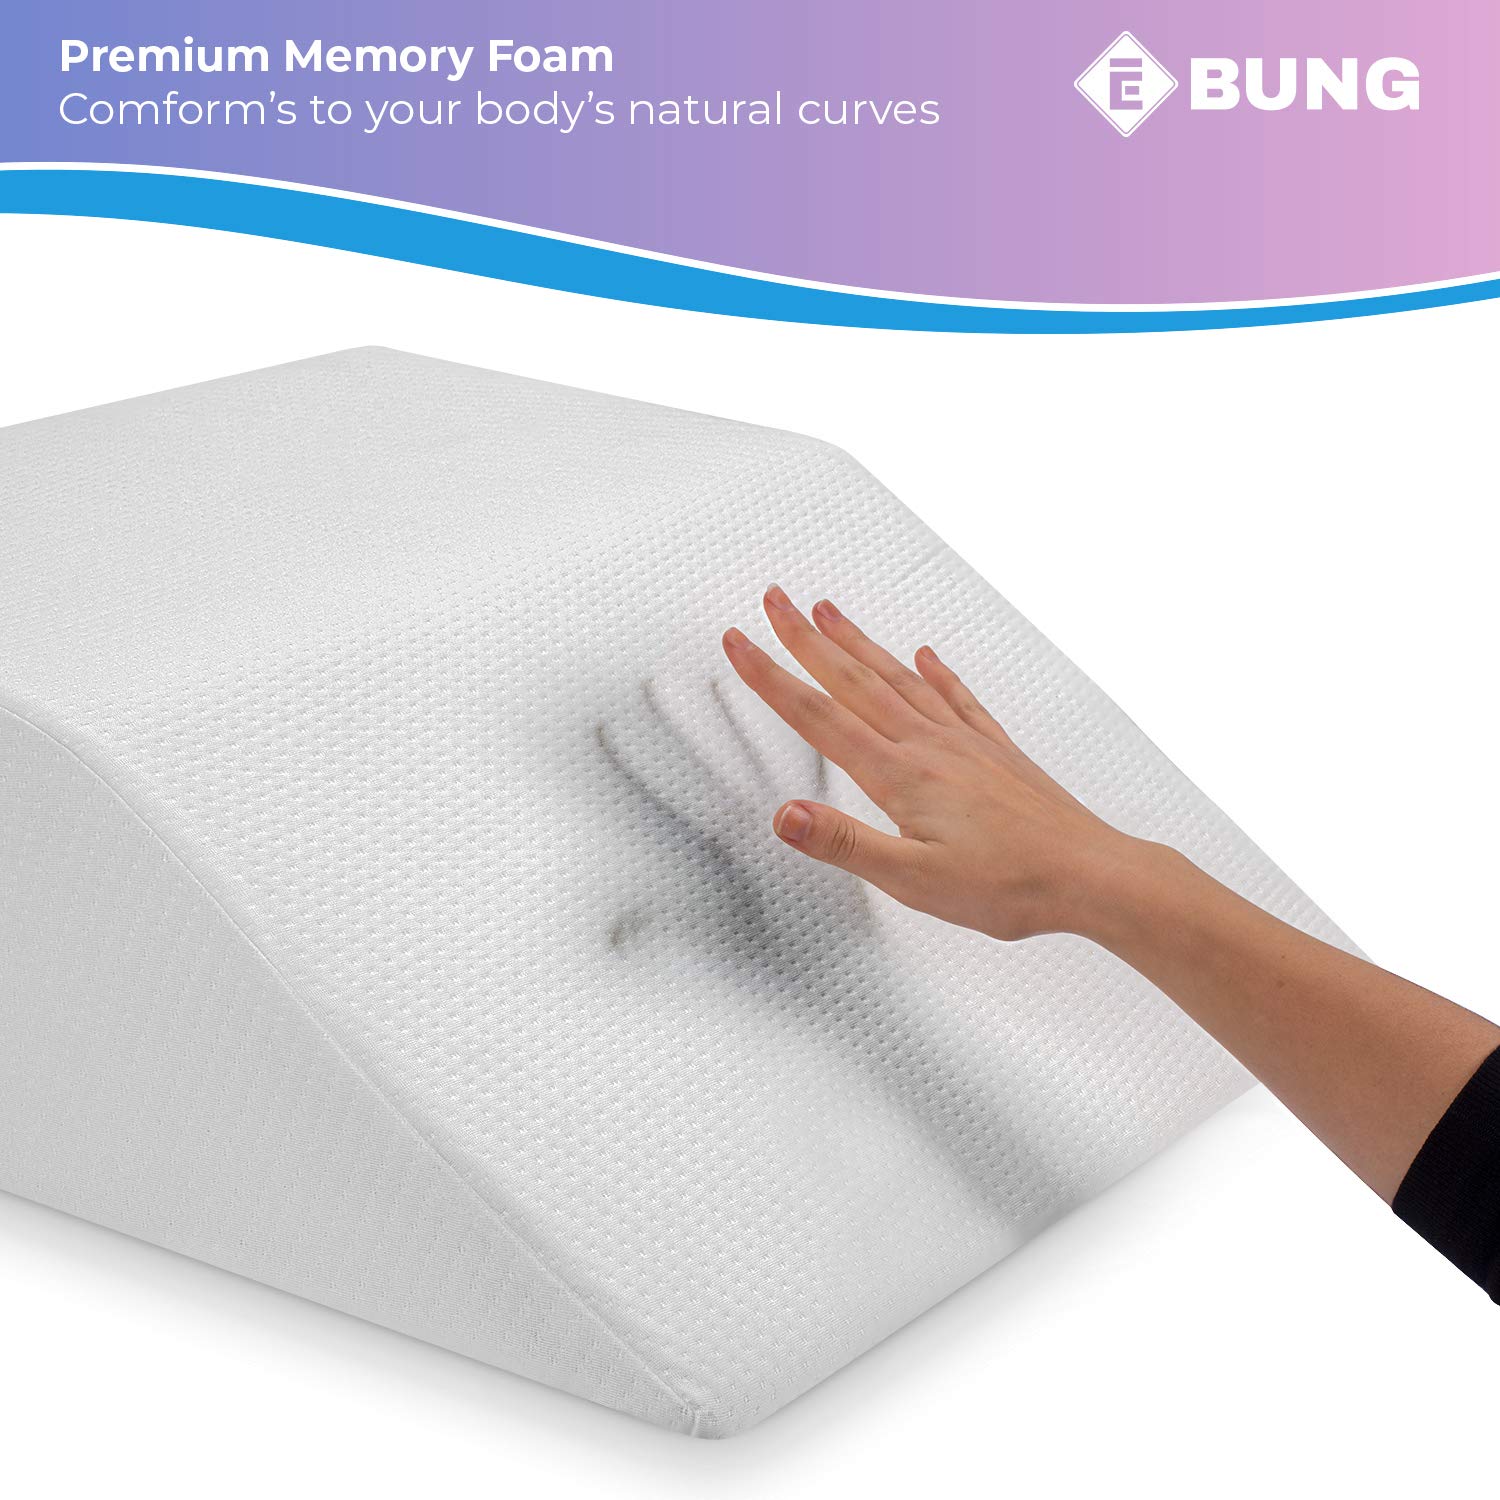 Ebung Memory Foam Leg Elevation Pillows - Leg Support Pillow to Elevate Feet, Sleeping, Blood Circulation, Leg Swelling Relief, Sciatica Pain Relief, Back Pain & Pregnancy - Leg Wedges for Elevation